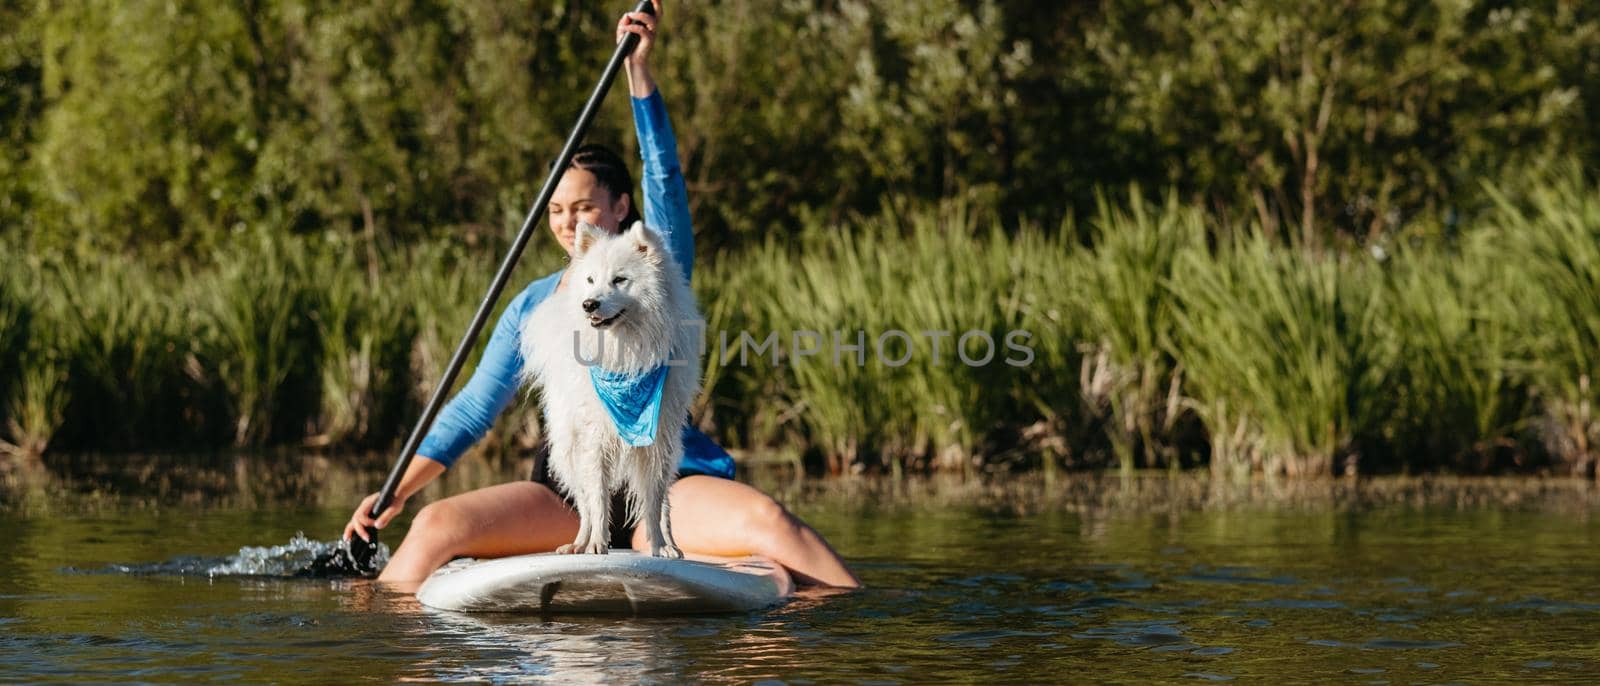 Young Woman Paddleboarding with Her Pet on the Lake, Snow-White Dog Breed Japanese Spitz Standing on the Sup Board by Romvy